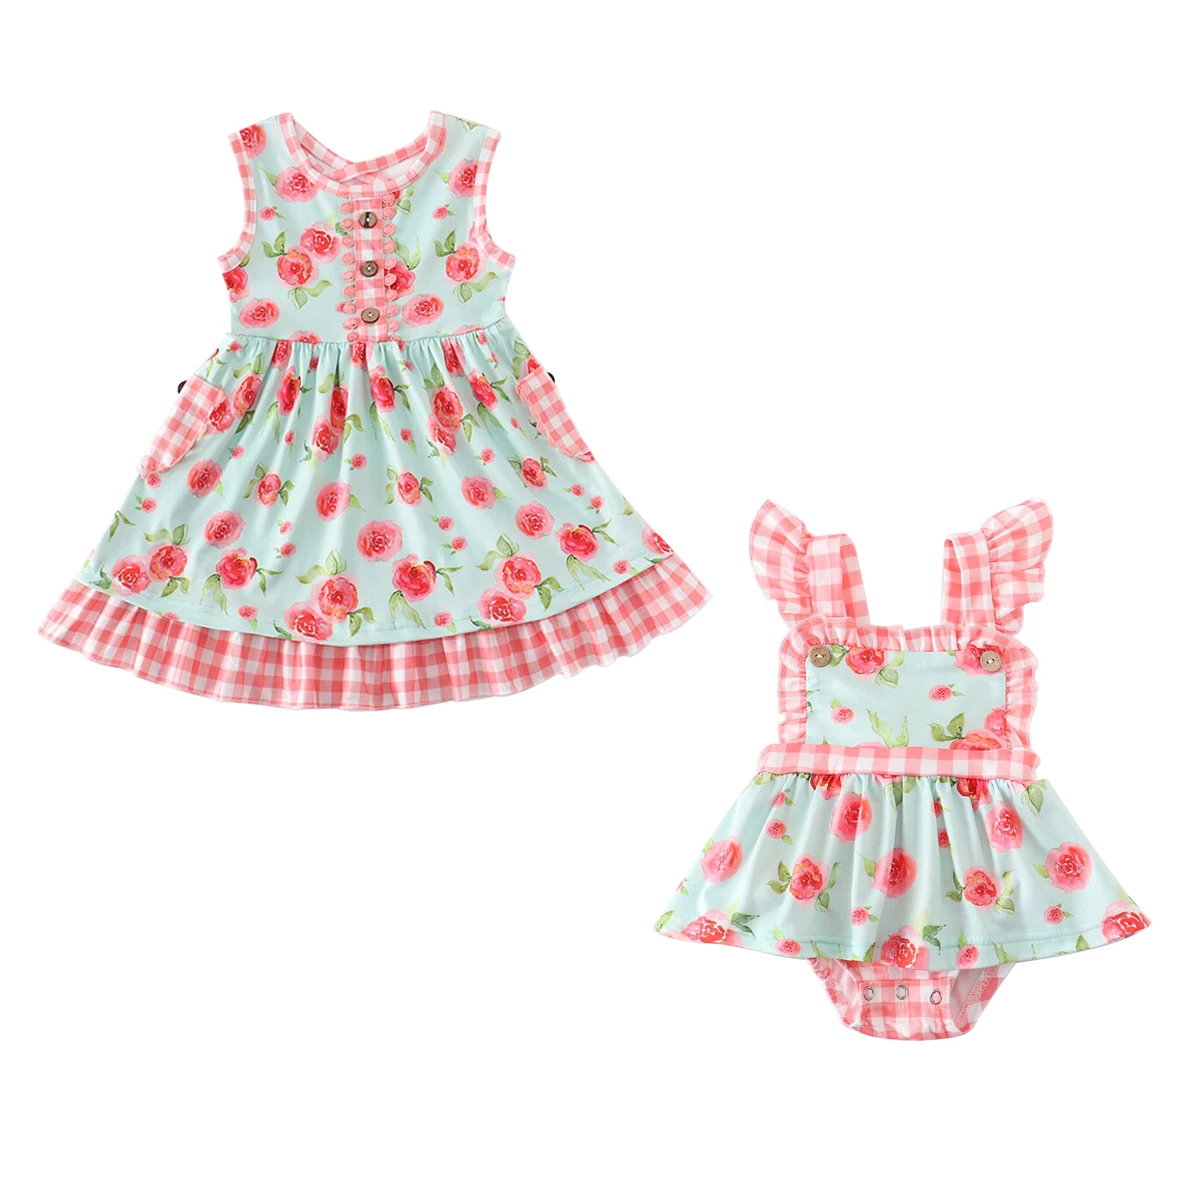 Girlymax Sibling Spring/Summer Baby Girls Dress Woven Romper Tutu Rainbow Floral Watermelon Kids Clothing angel baby suit